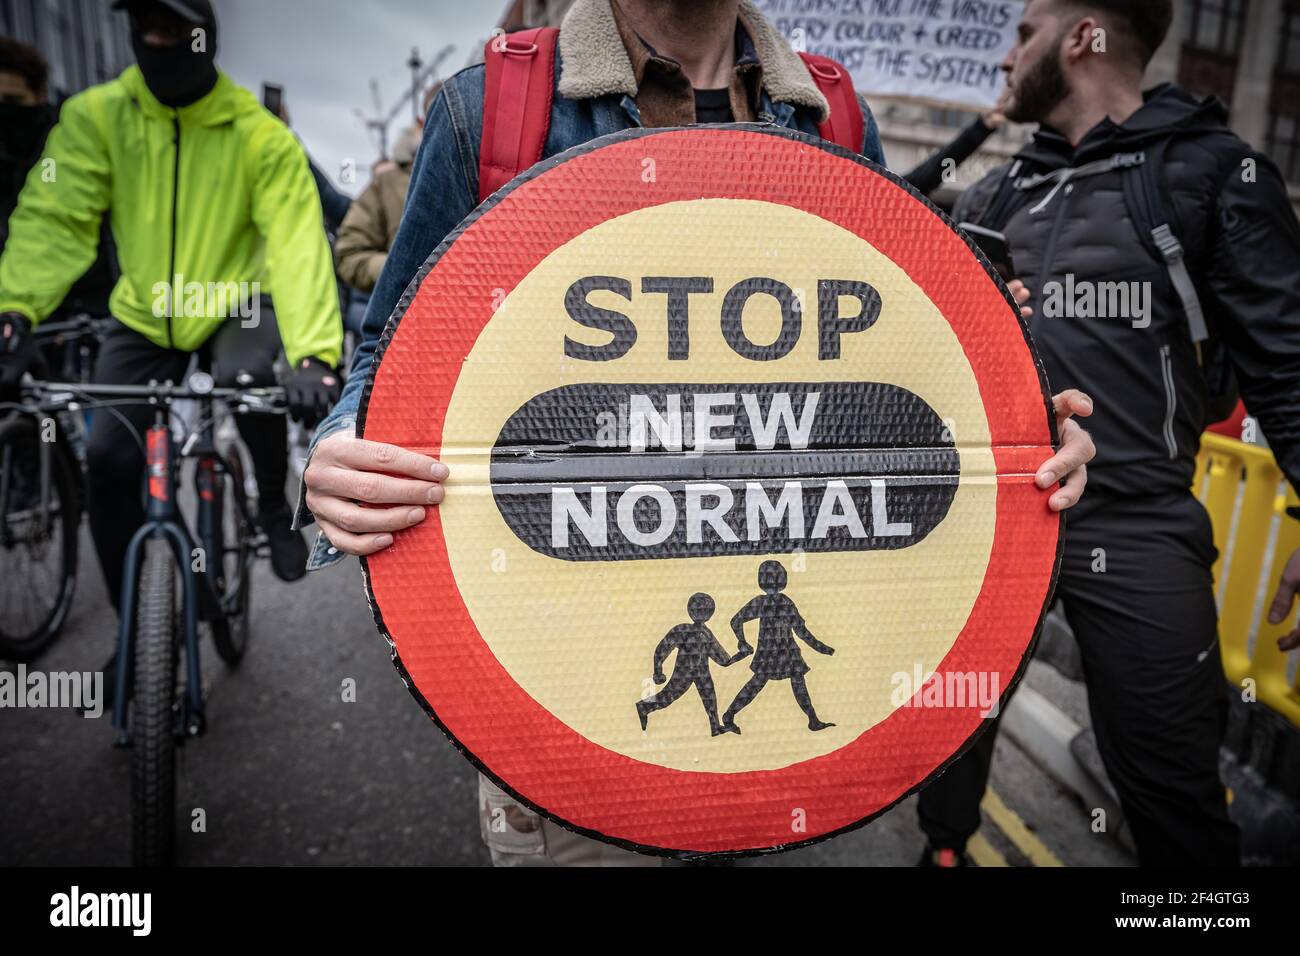 Coronavirus: Thousands of anti-lockdown demonstrators march under heavy police surveillance from Hyde Park to Westminster. London, UK. Stock Photo